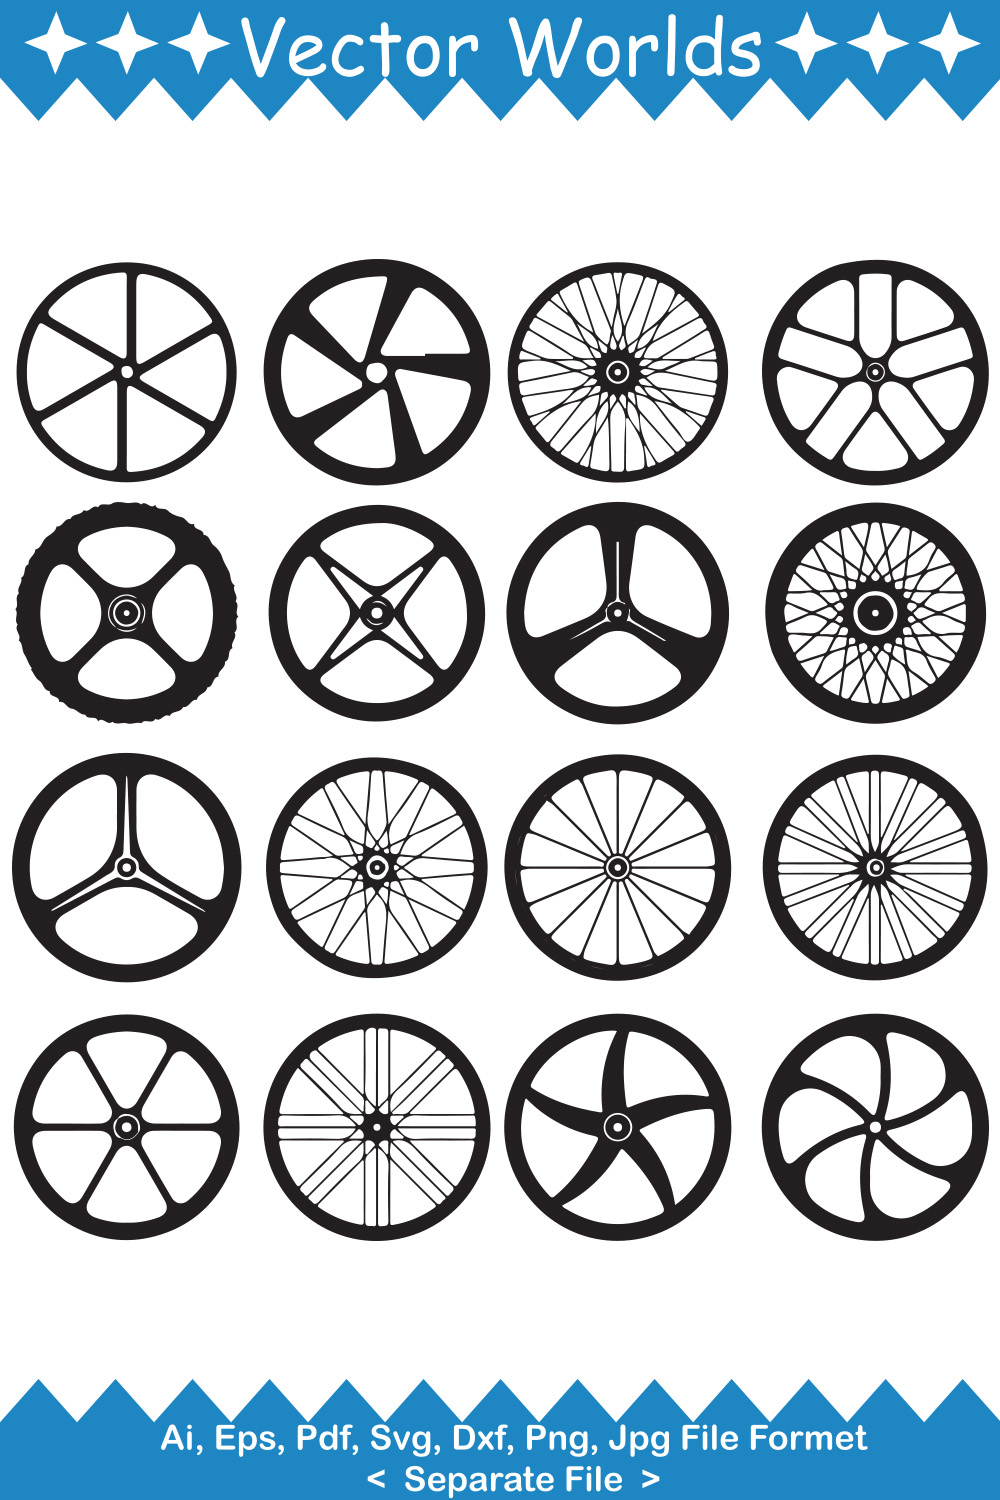 Bundle of exquisite images of black bicycle wheels.